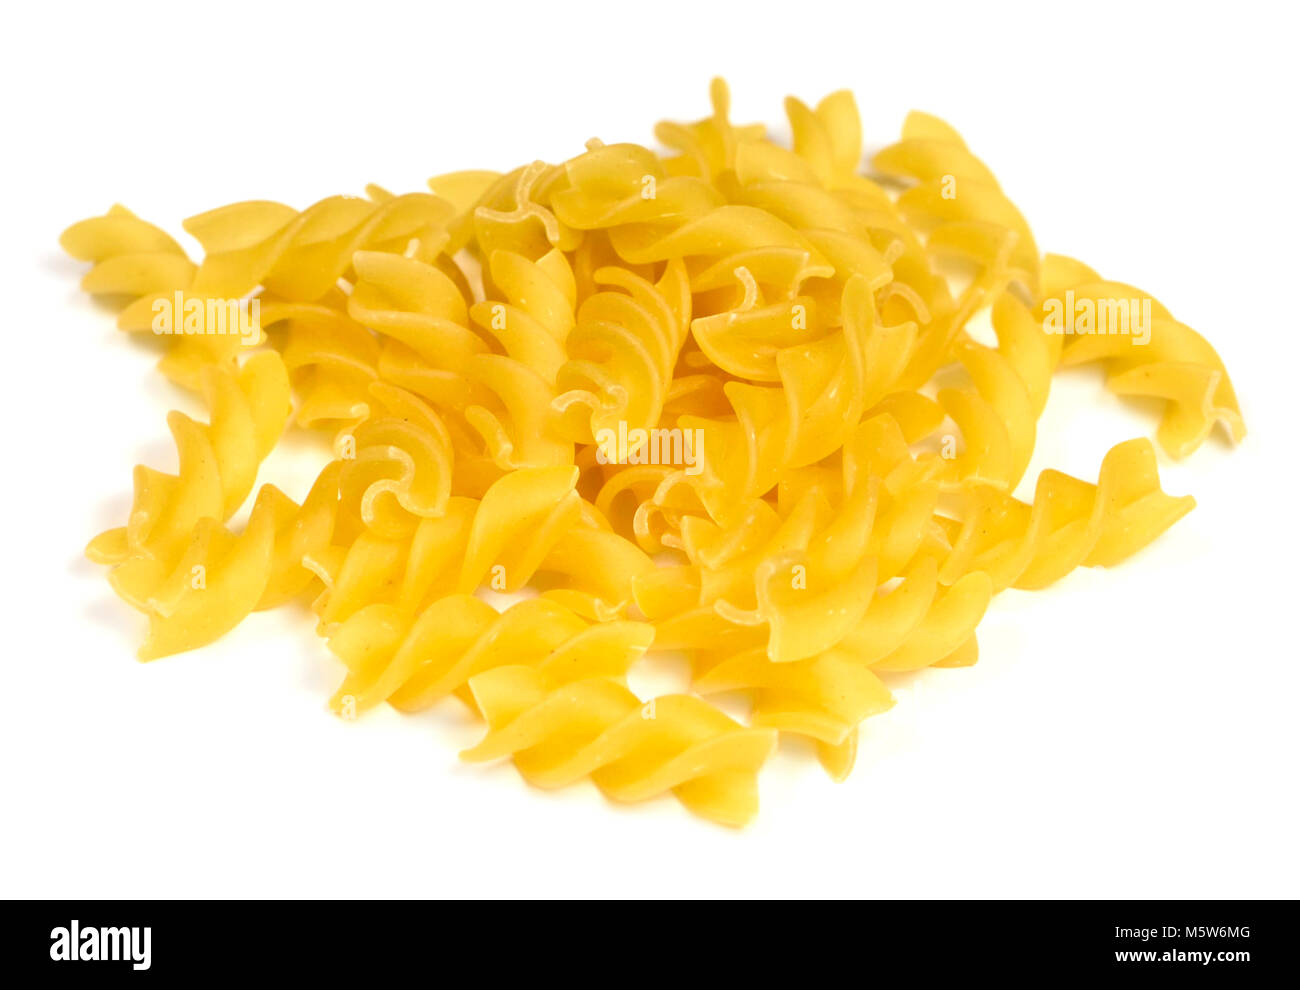 Raw pasta or dry pasta, isolated on white background. Italian pasta, fussili noodles on white with copy space. Cut out food or ingredients. Stock Photo